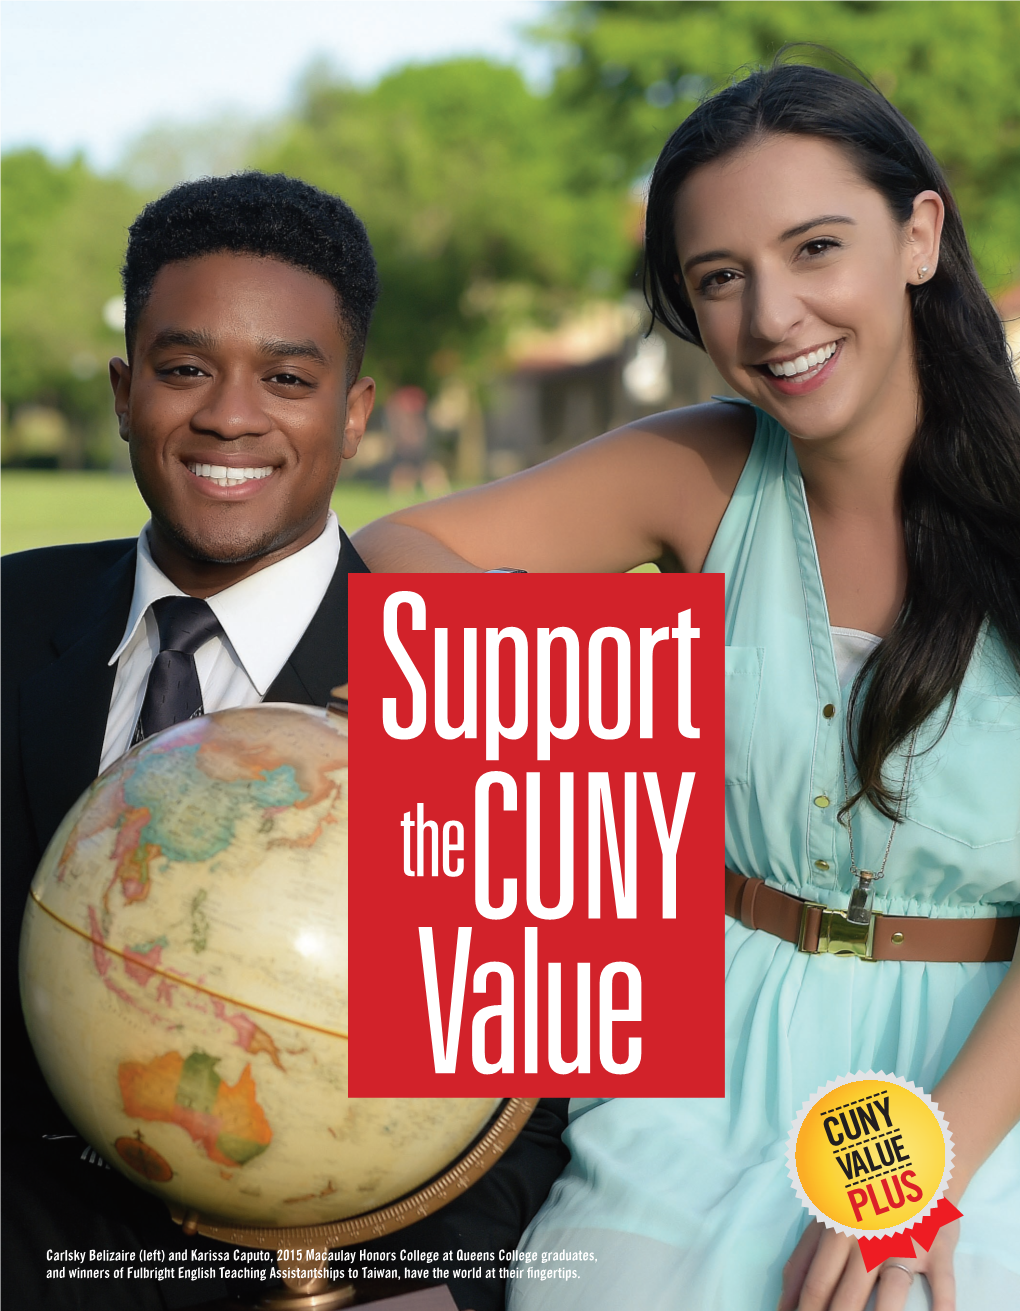 Support the CUNY Value by Visiting Supportcuny.Org